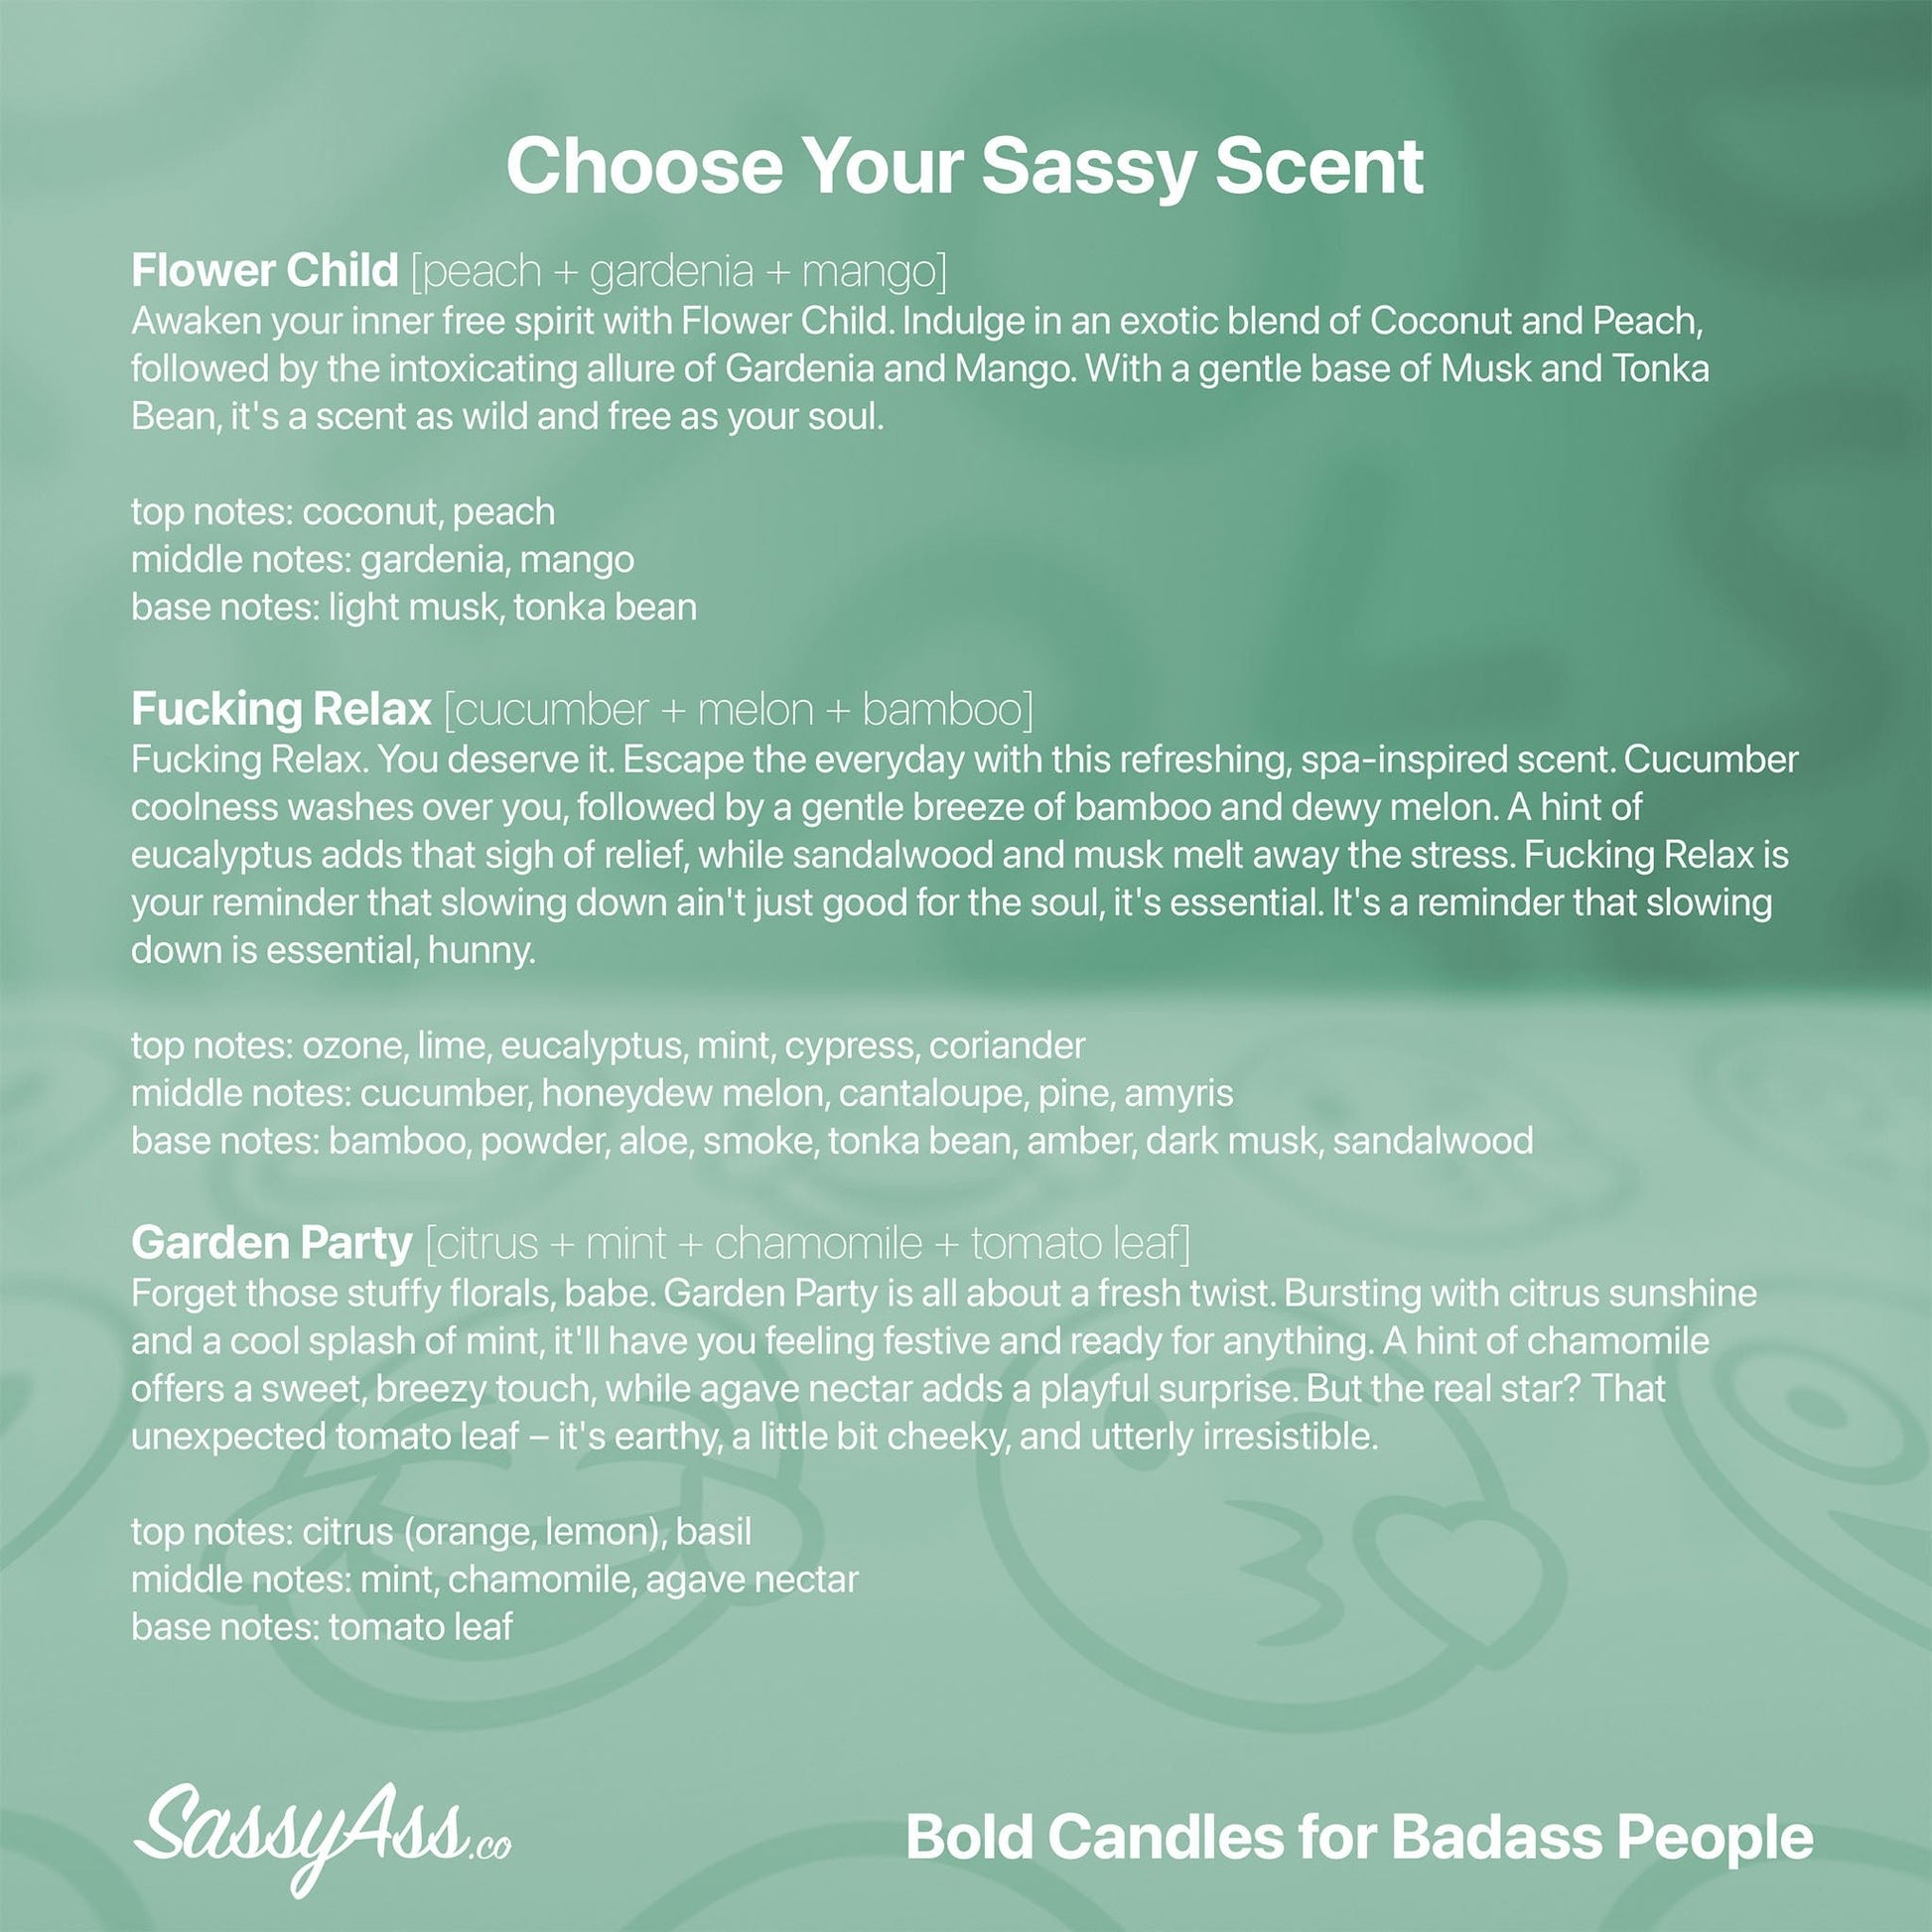 Manifesting Charlie Puth in My DMs Vegan Soy Candle: Cruelty-Free, Eco-Friendly, & Sassy Gift for Music Lovers & Pop Culture Fanatics - the back cover of the book choose your sassy scent - SassyAss.co